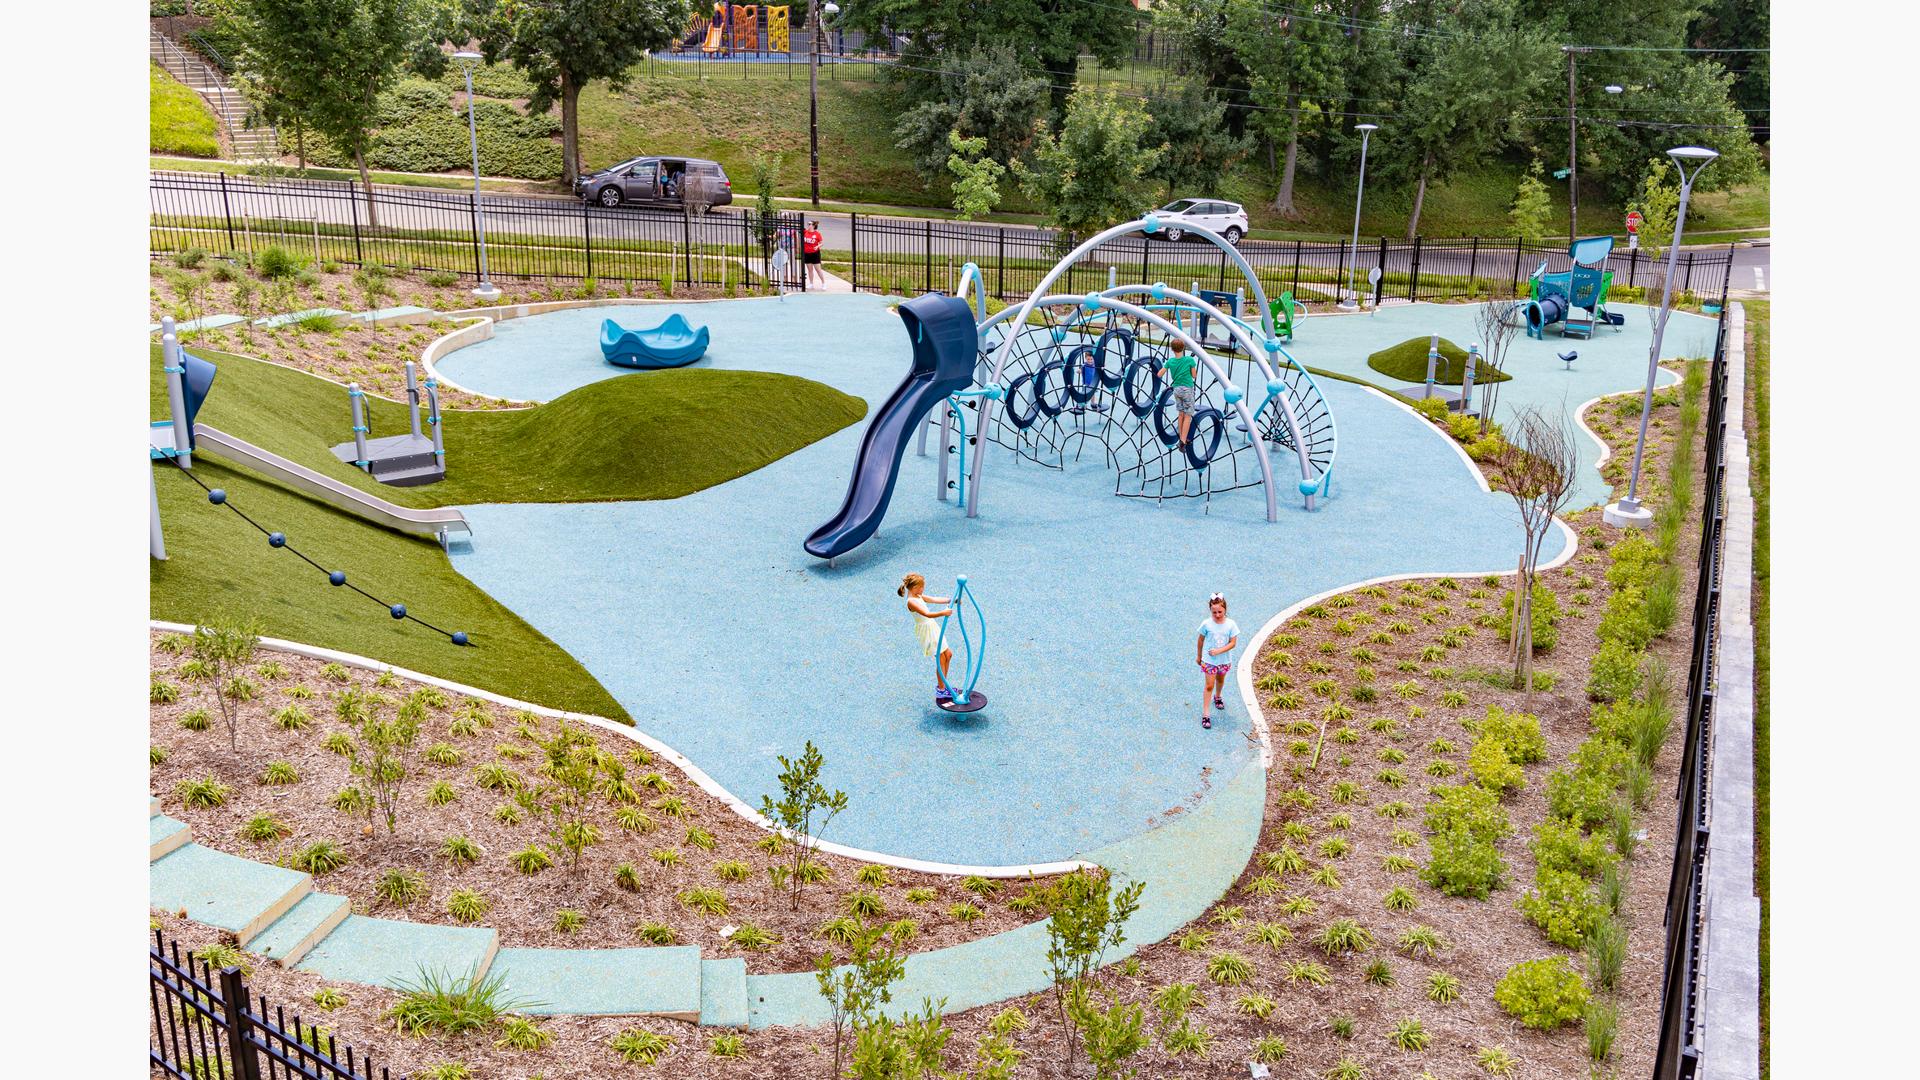 An elevated view of a recreation center park surrounded by a black iron fence. Two separate play A small house like play structure for younger children sits in the background while a larger play area for older children sits in the middle of the park. Multiple large silver arched posts cluster rope and hoop climbers and a slide. The play area slants up a hill with artificial grass, roller slide, and angled climbing rope.